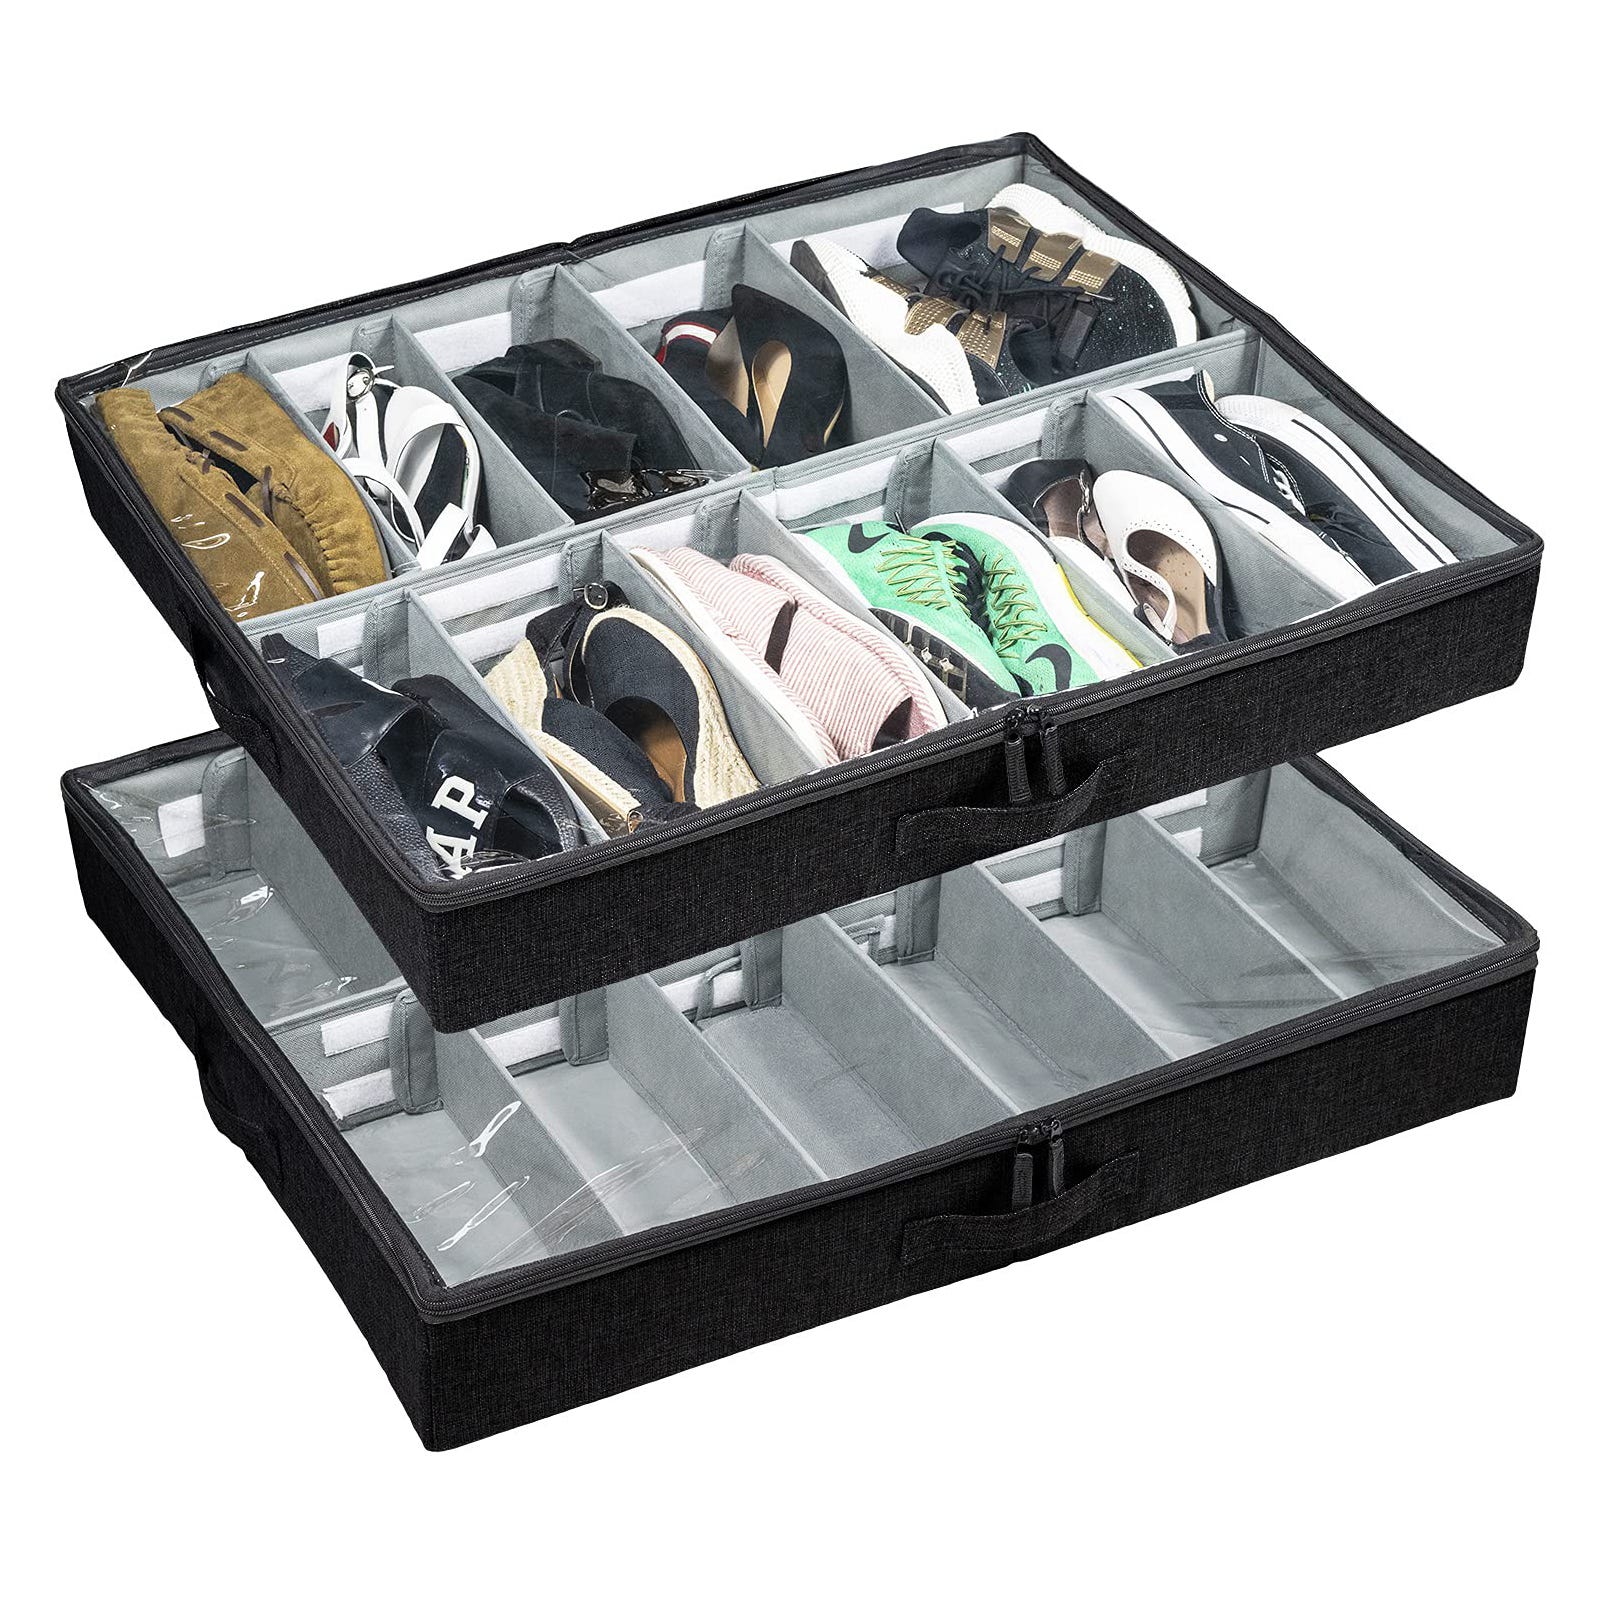 A clear-topped shoe organizer with various types of footwear stored inside.